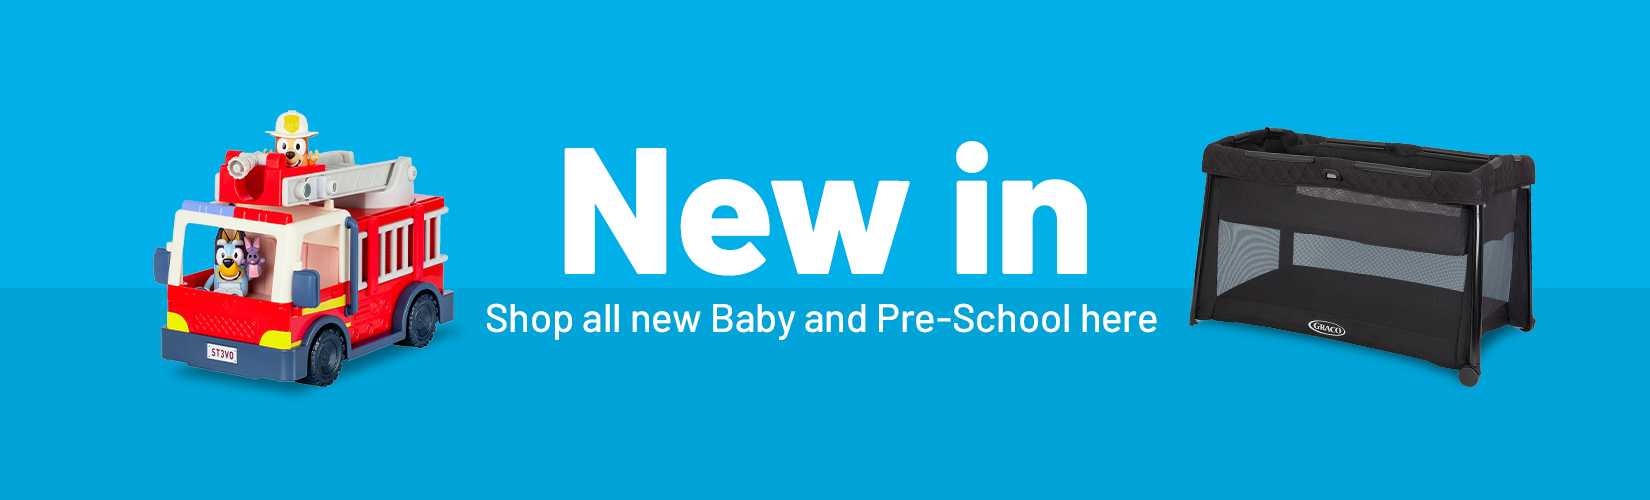 New in. Shop all new Baby and Pre-School here.